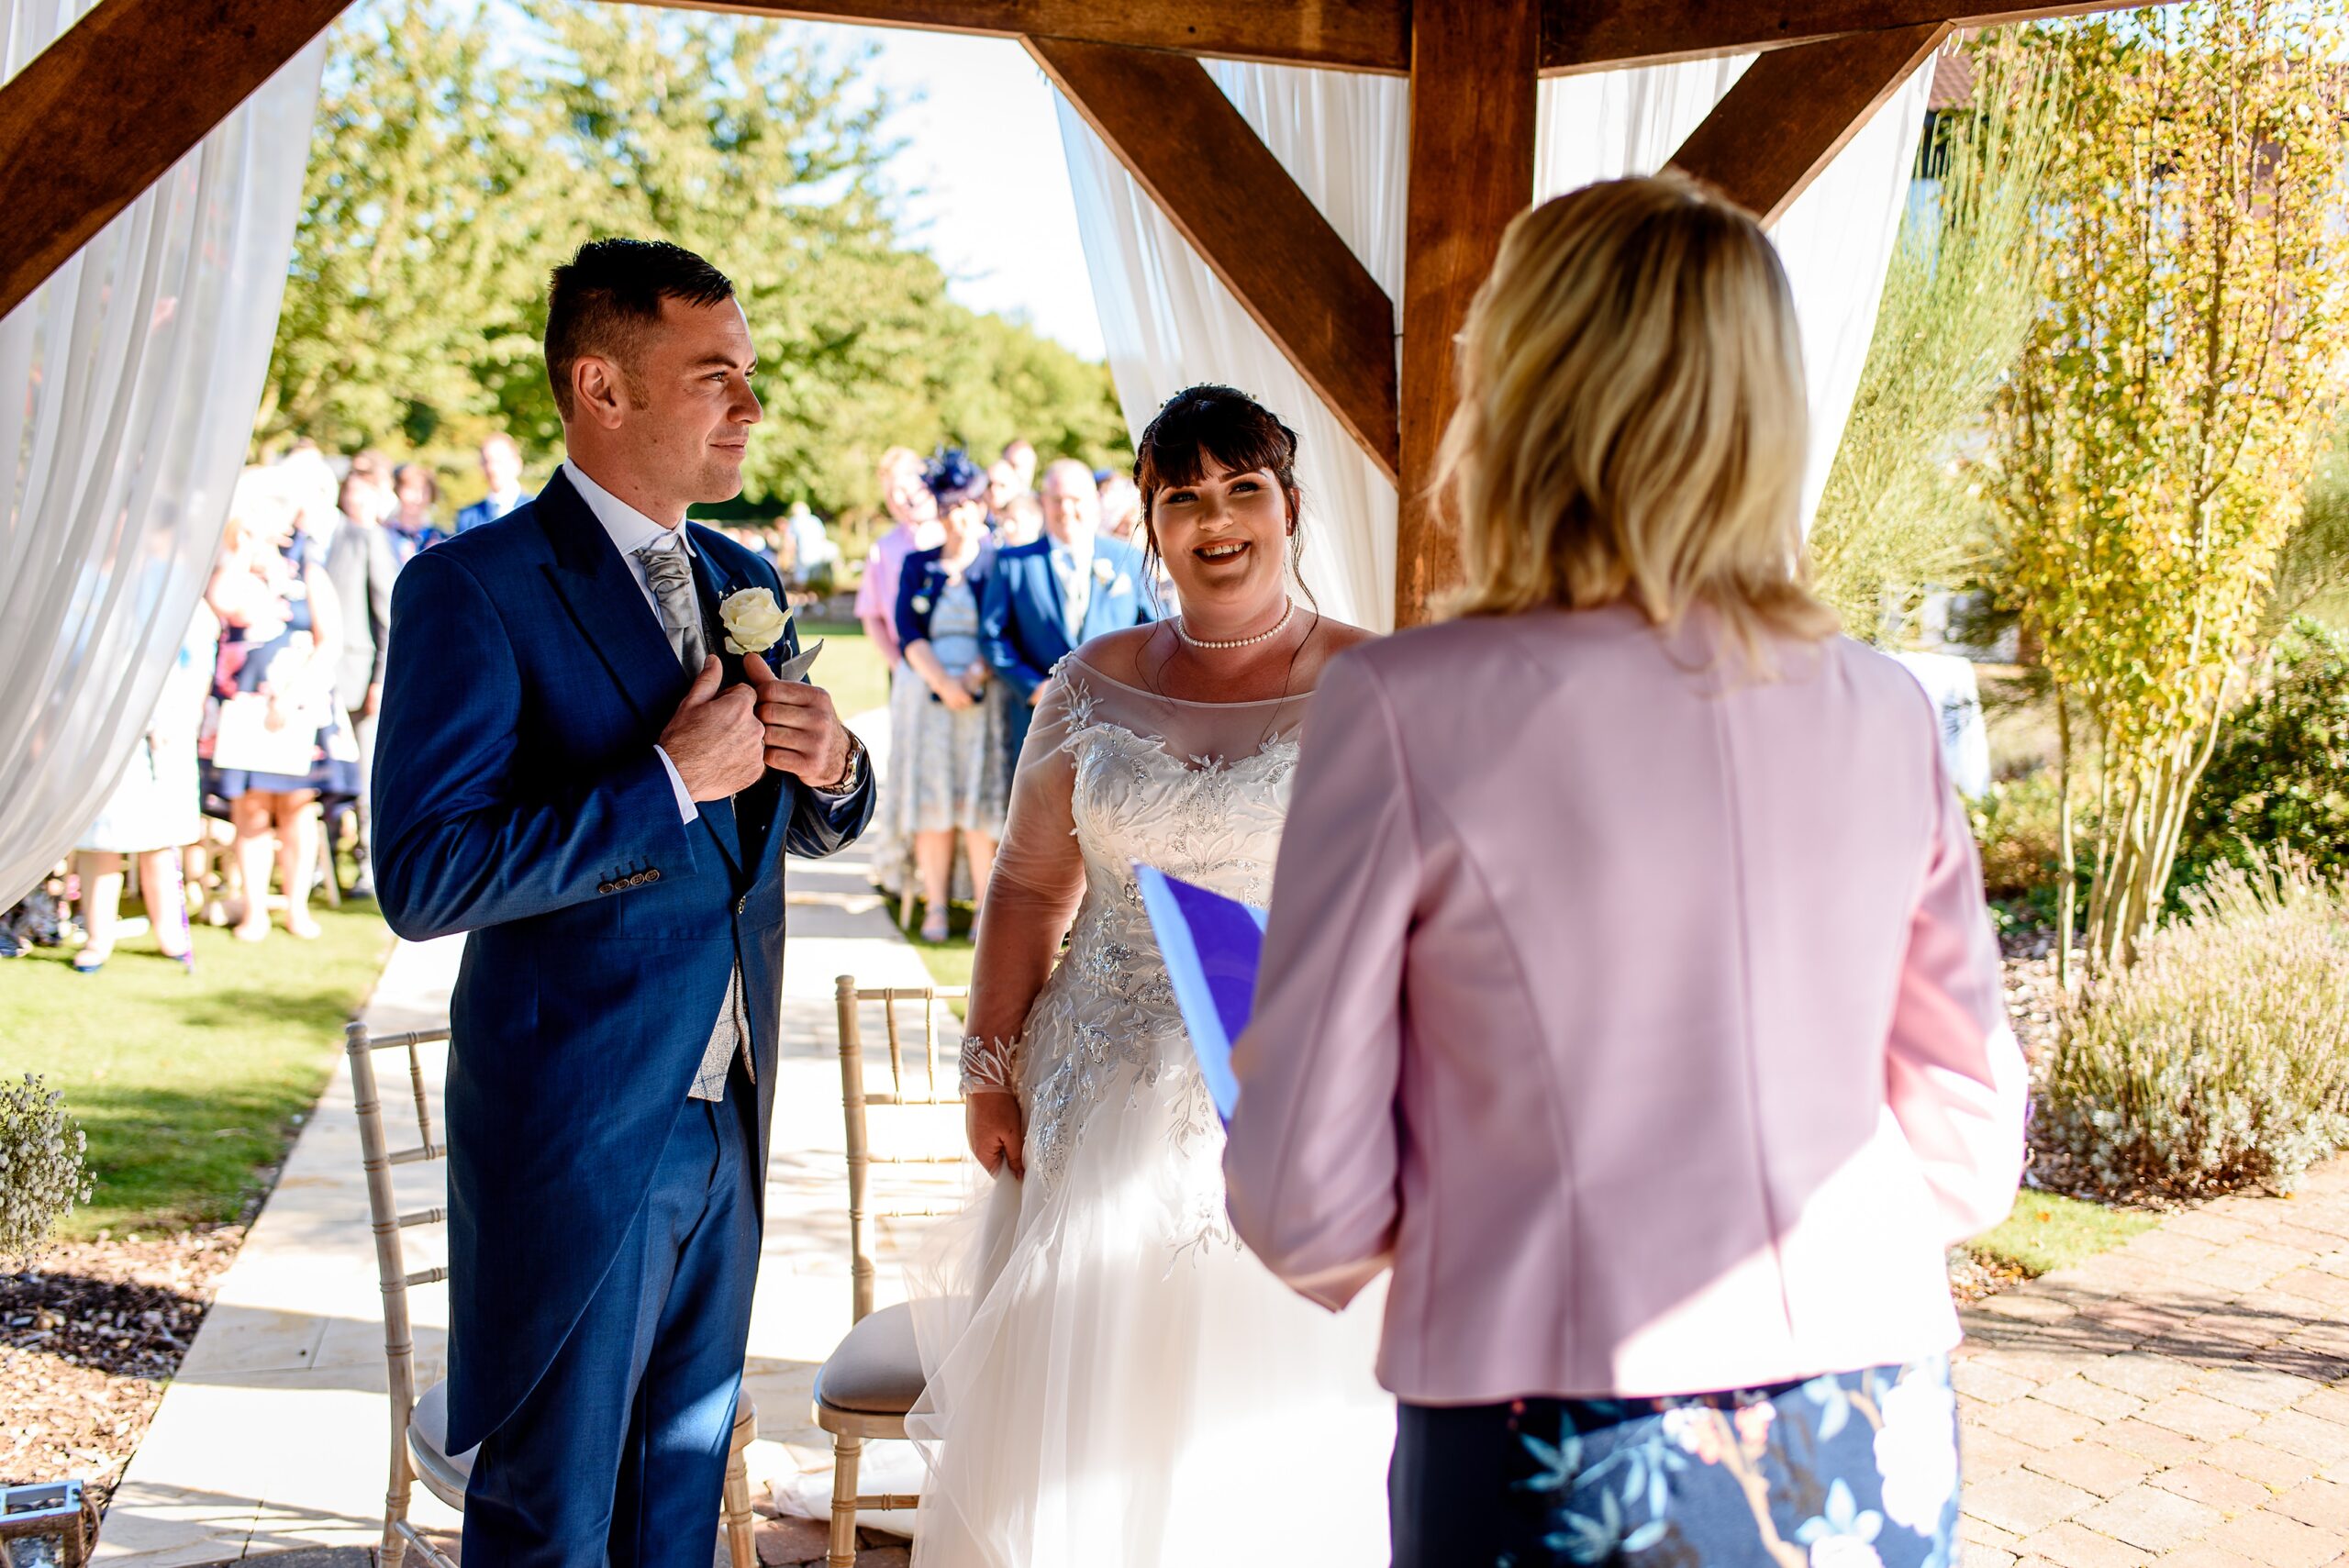 A bride and groom exchange vows at Laceby Manor under a gazebo.